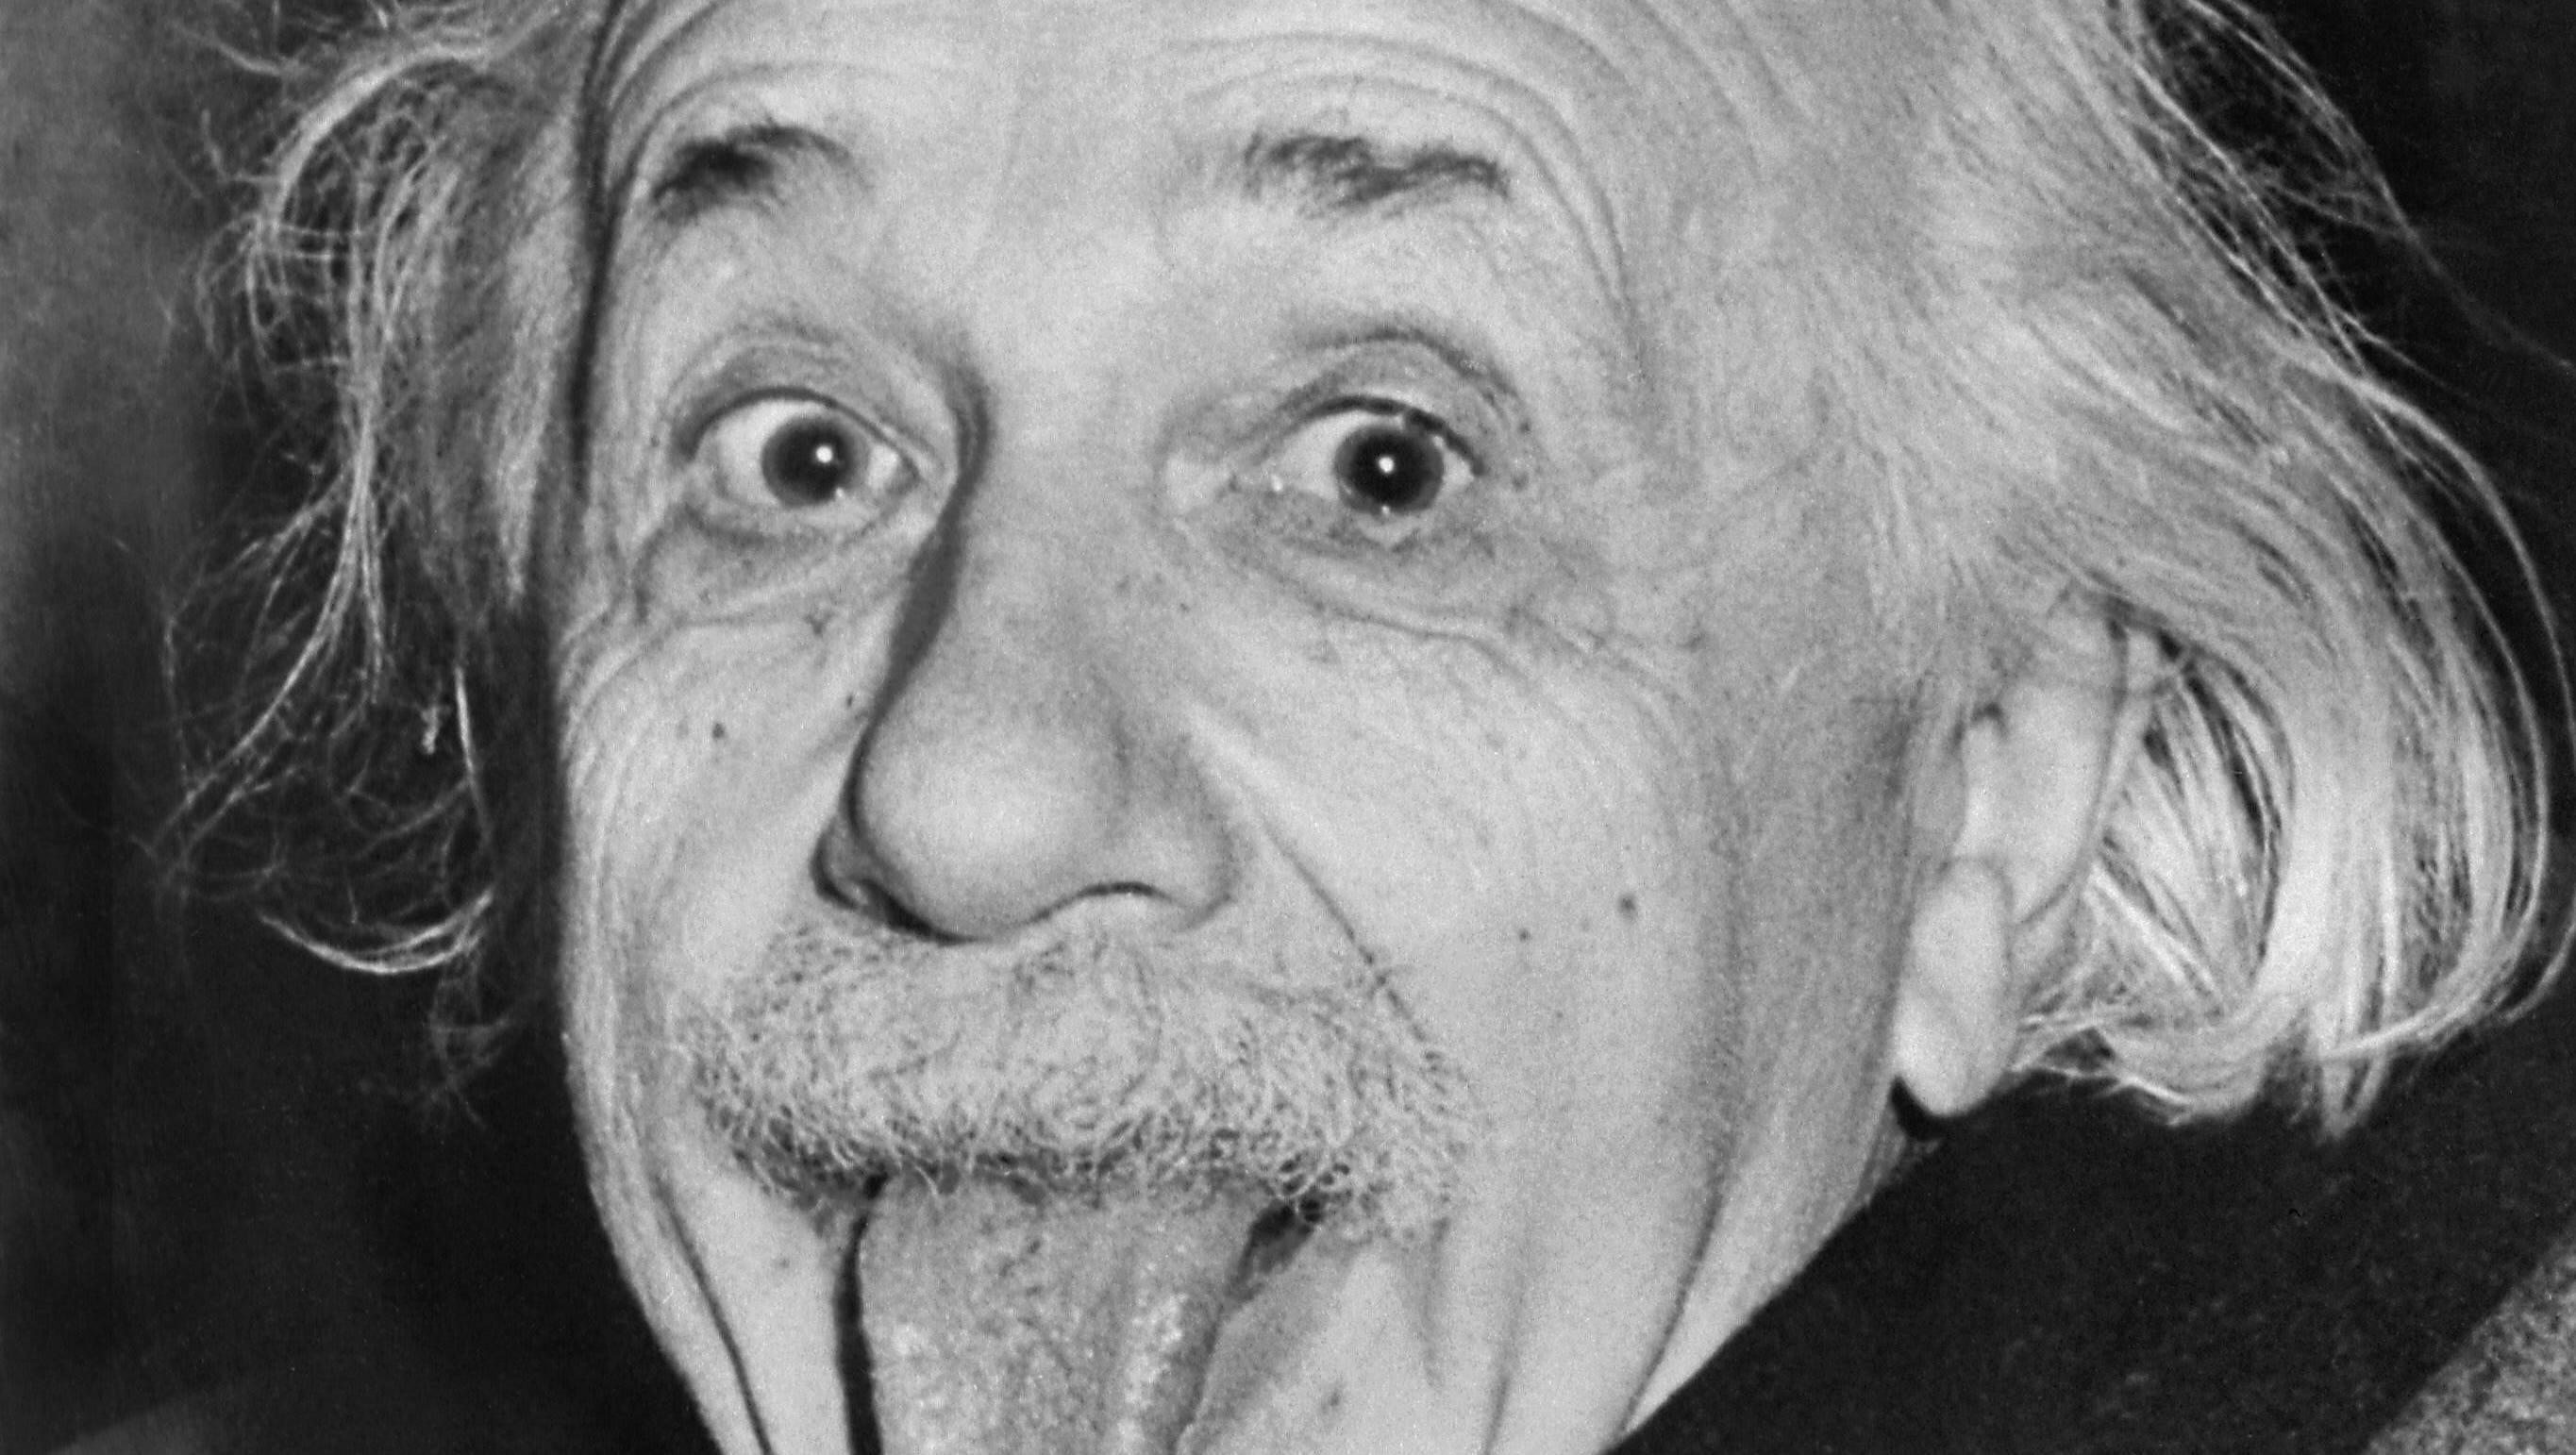 Who has the highest IQ? Here's what's know about the smartest people in